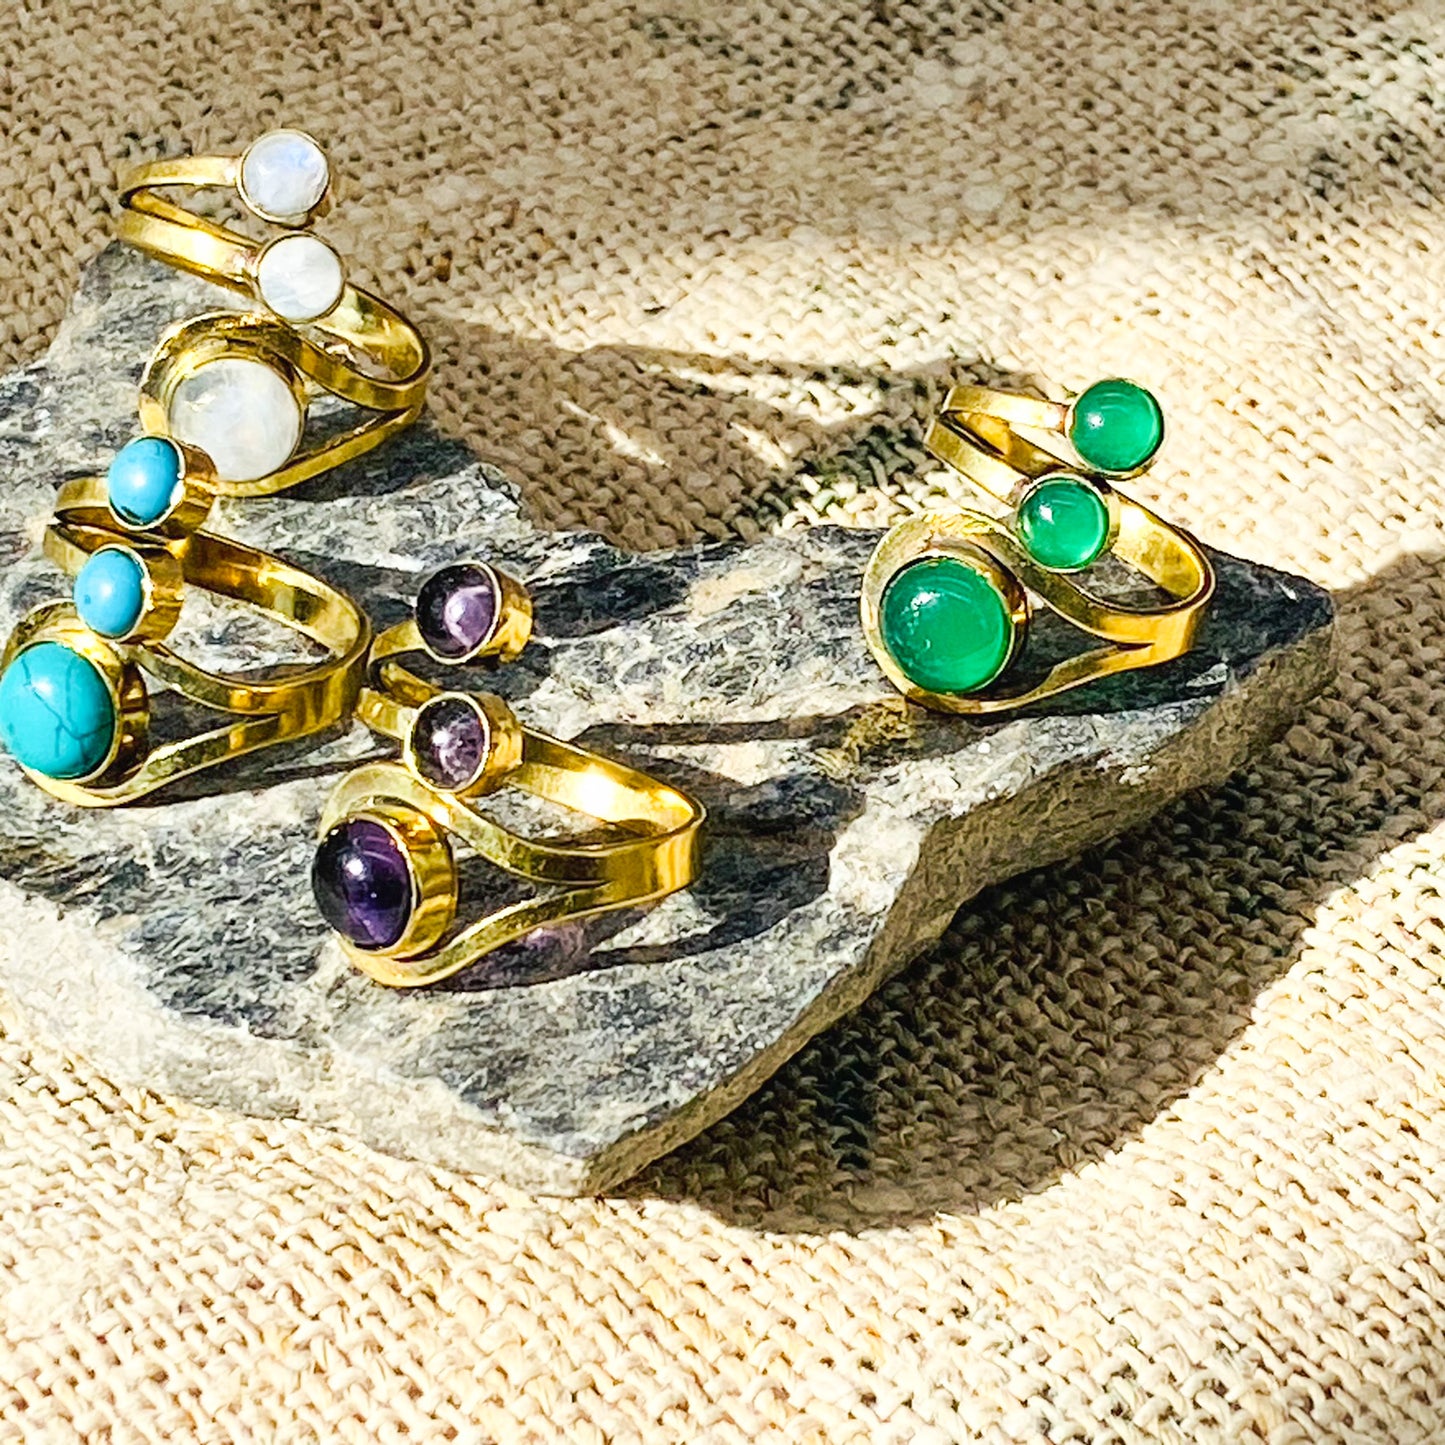 Adjustable Chunky Rings, Bohemian Rings, Gold Filled Handmade Multistone Rings, Gift For Her, Non Tarnish Rings, Gypsy Style, Crystal Rings